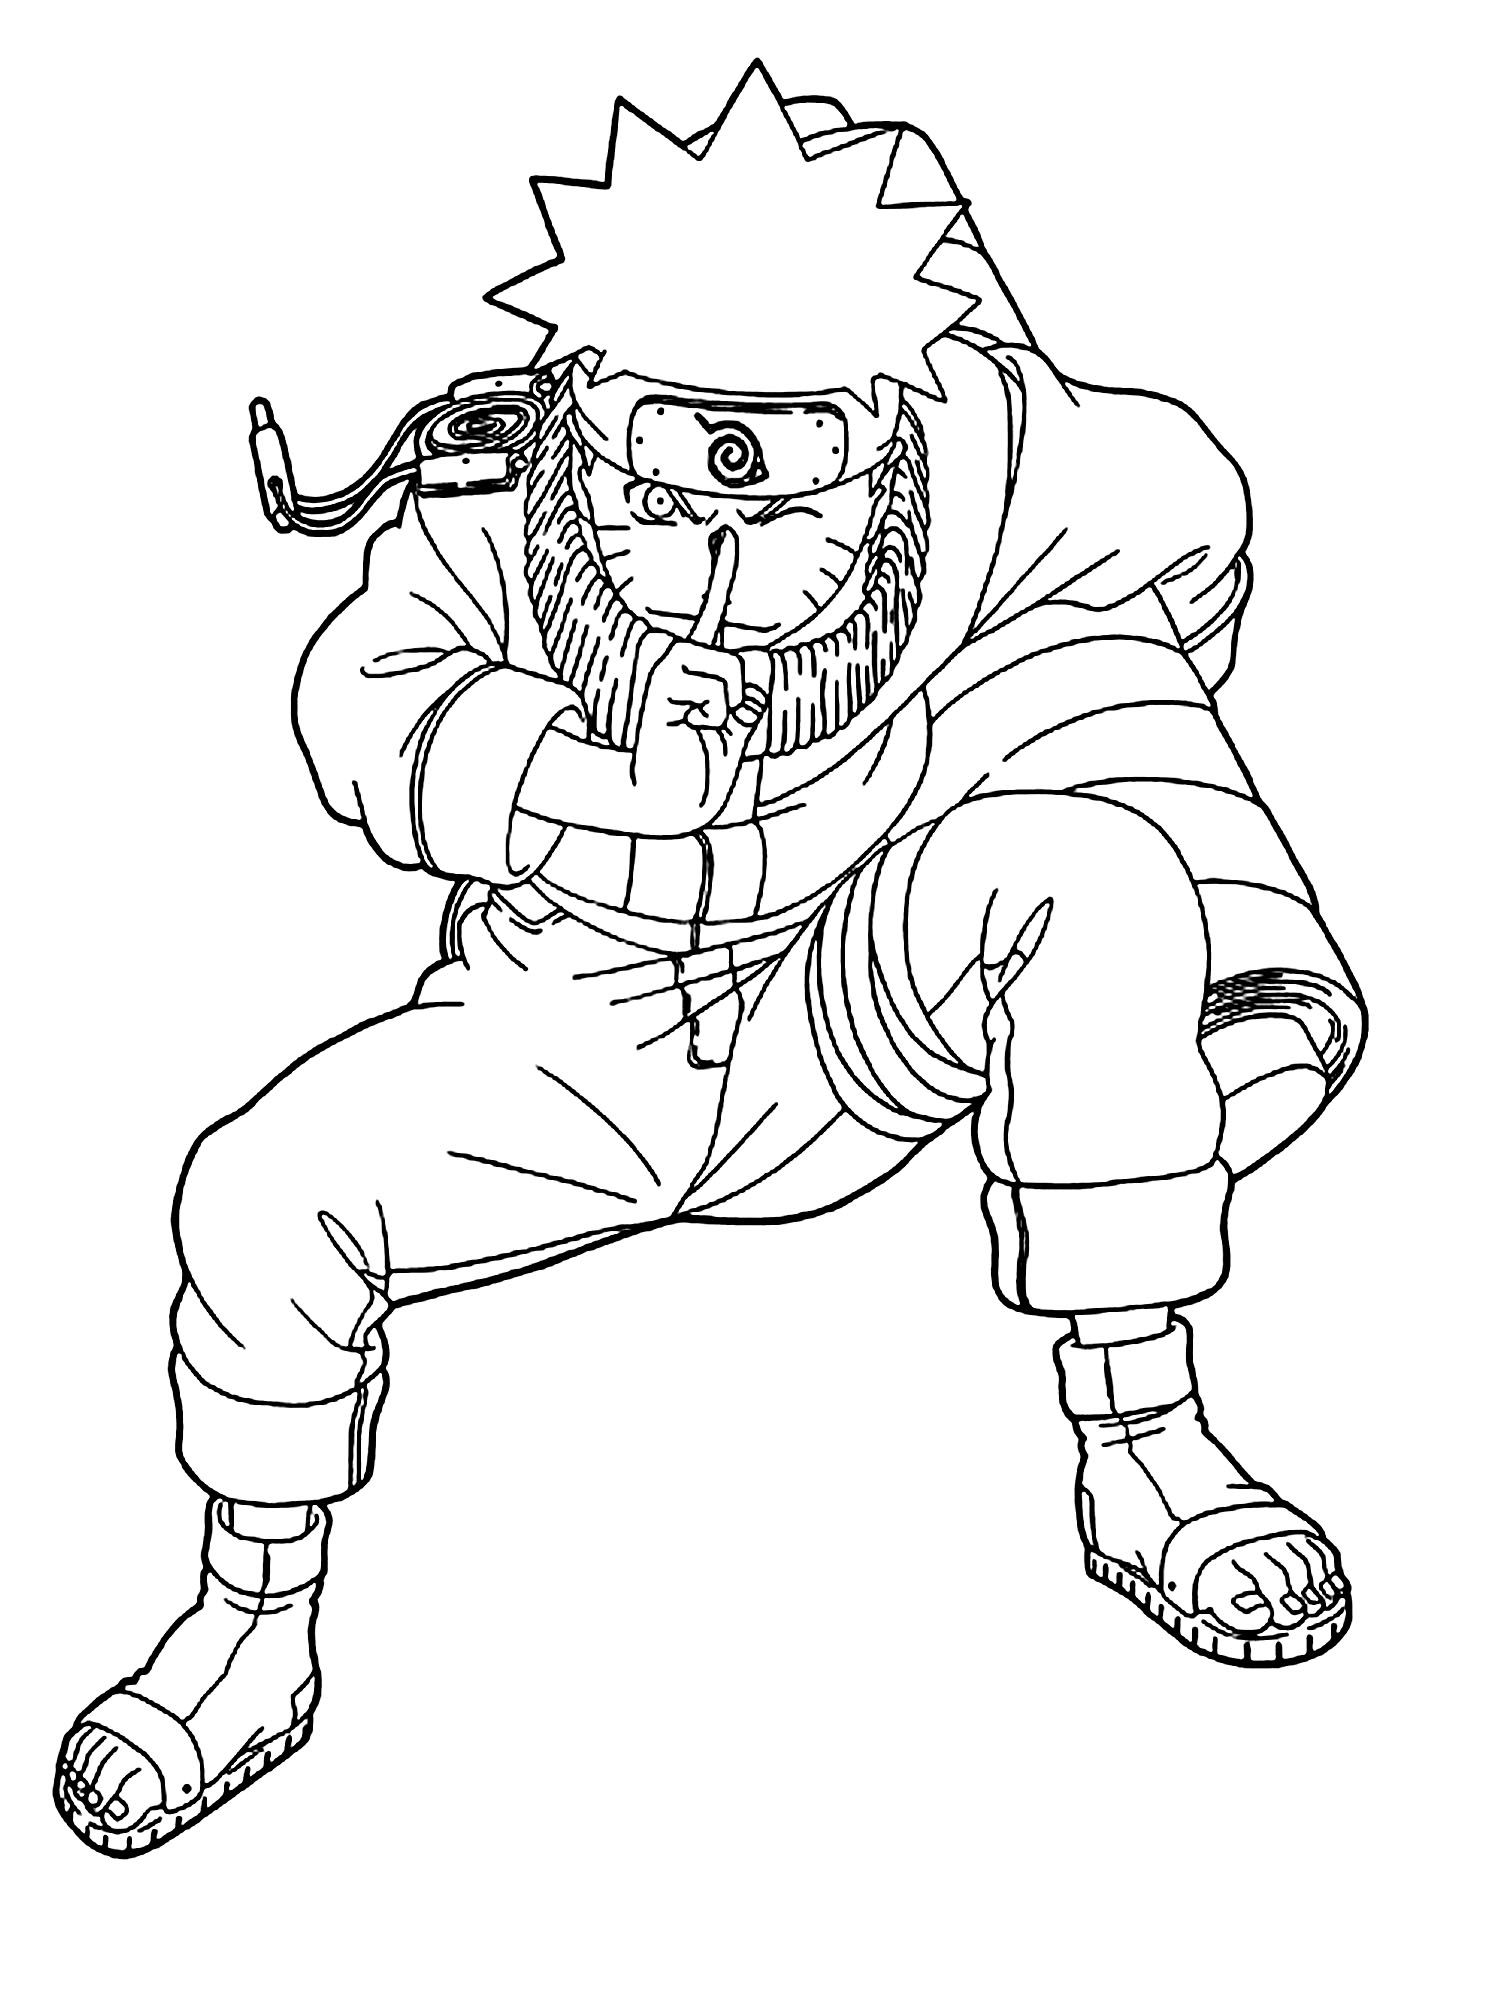 Download Naruto to print for free - Naruto Kids Coloring Pages